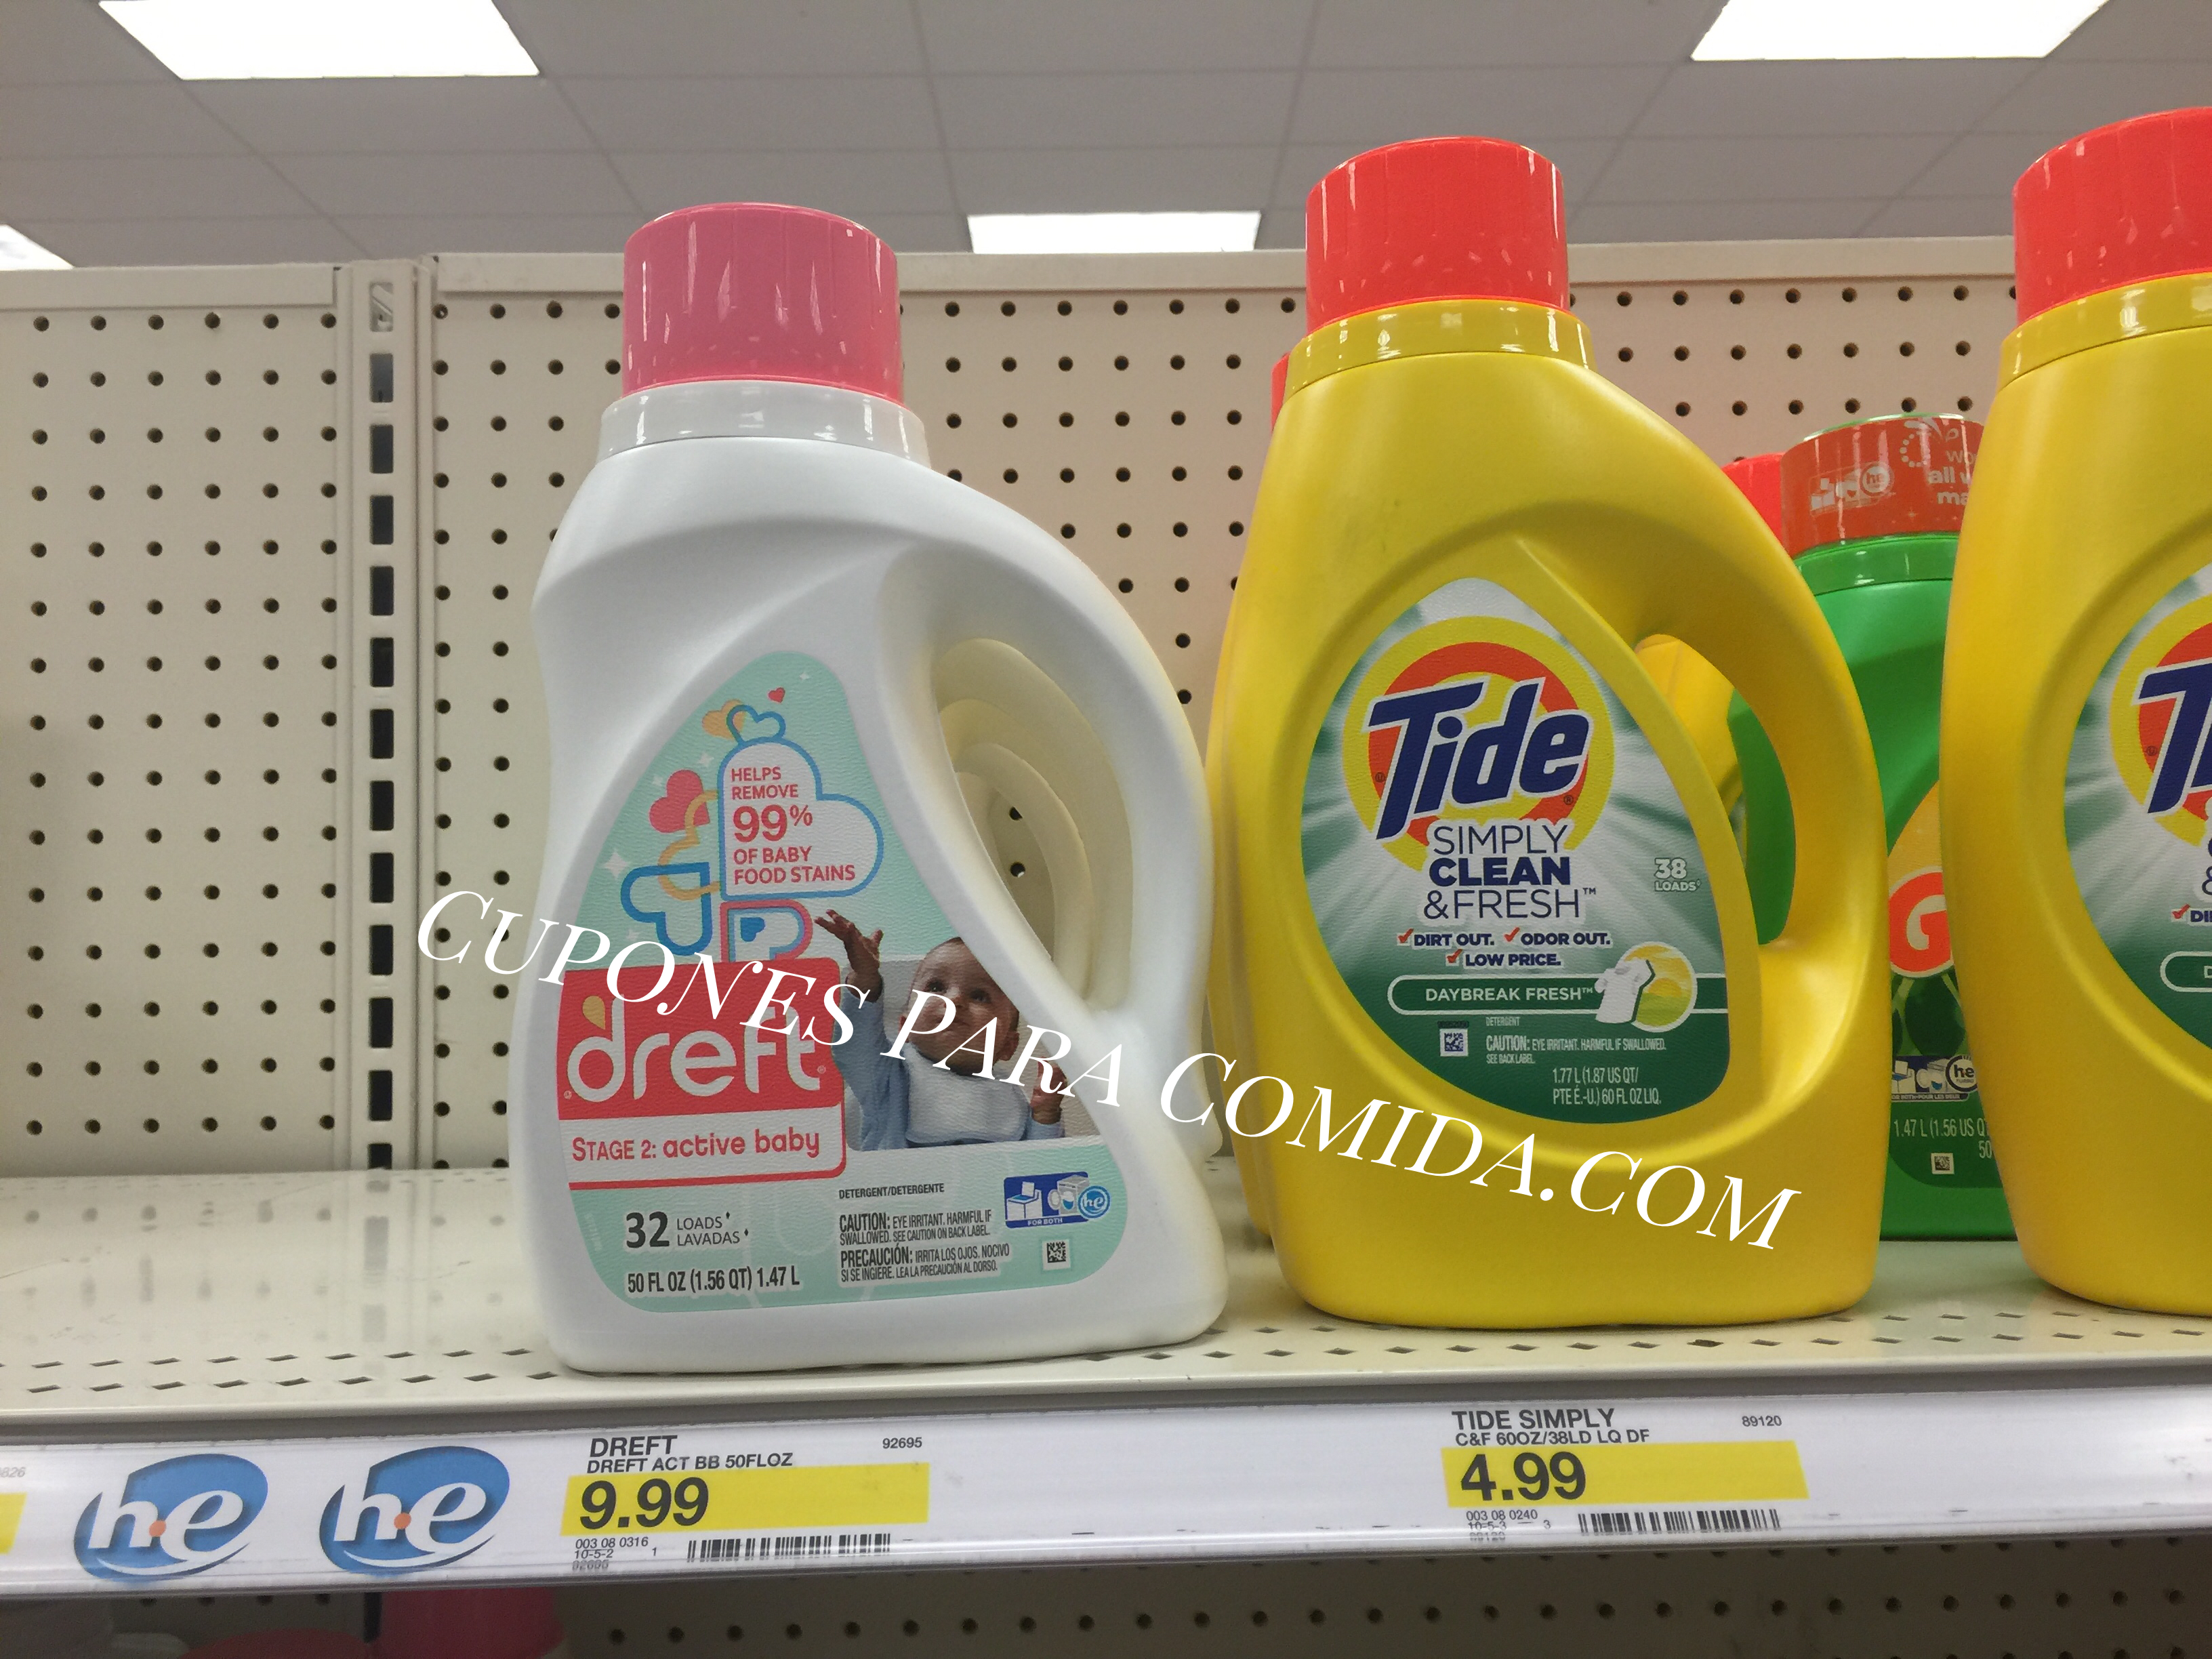 Tide Simply Laundry Detergent 38 Loads - Target 10/24/15